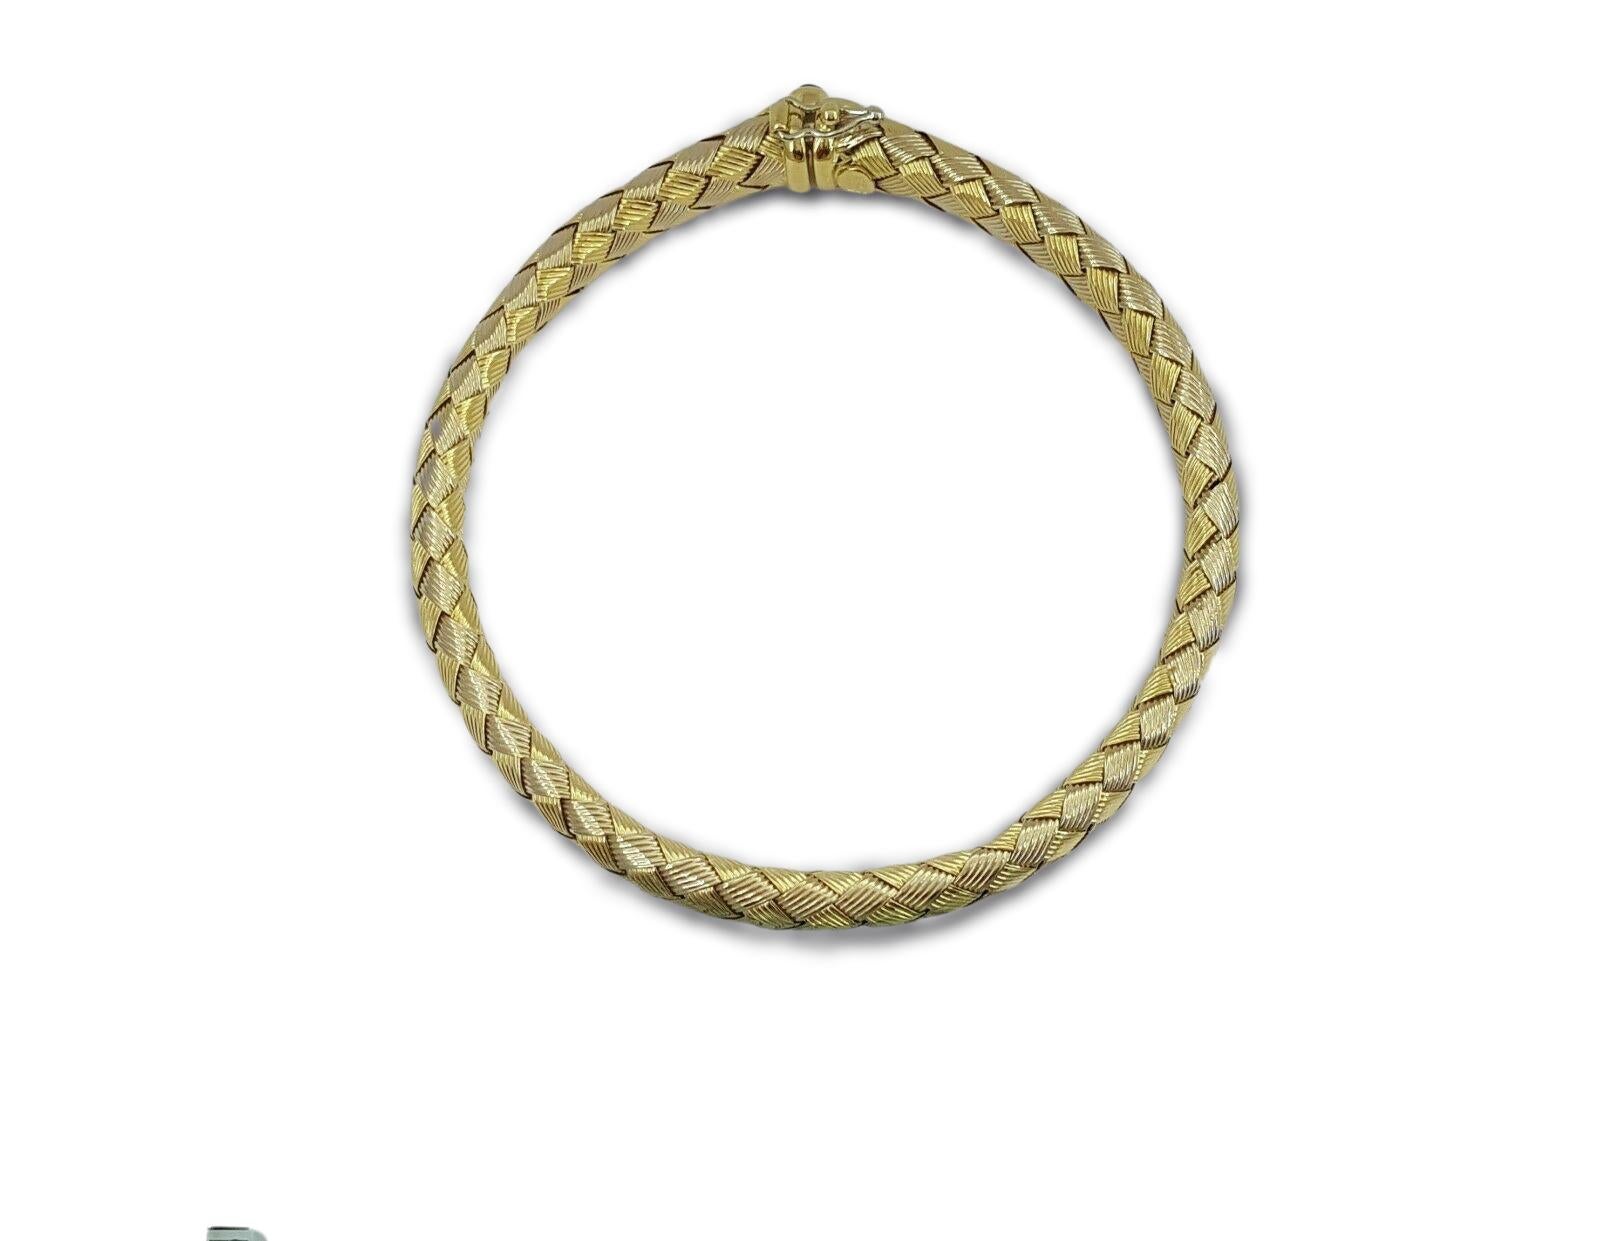 Exquisite Roberto Coin 18 carat Yellow Gold Woven Silk Basket Weave Flexible Bangle / Bracelet. The bracelet weighs 20 grams. 

The measurements of the bracelet are 7